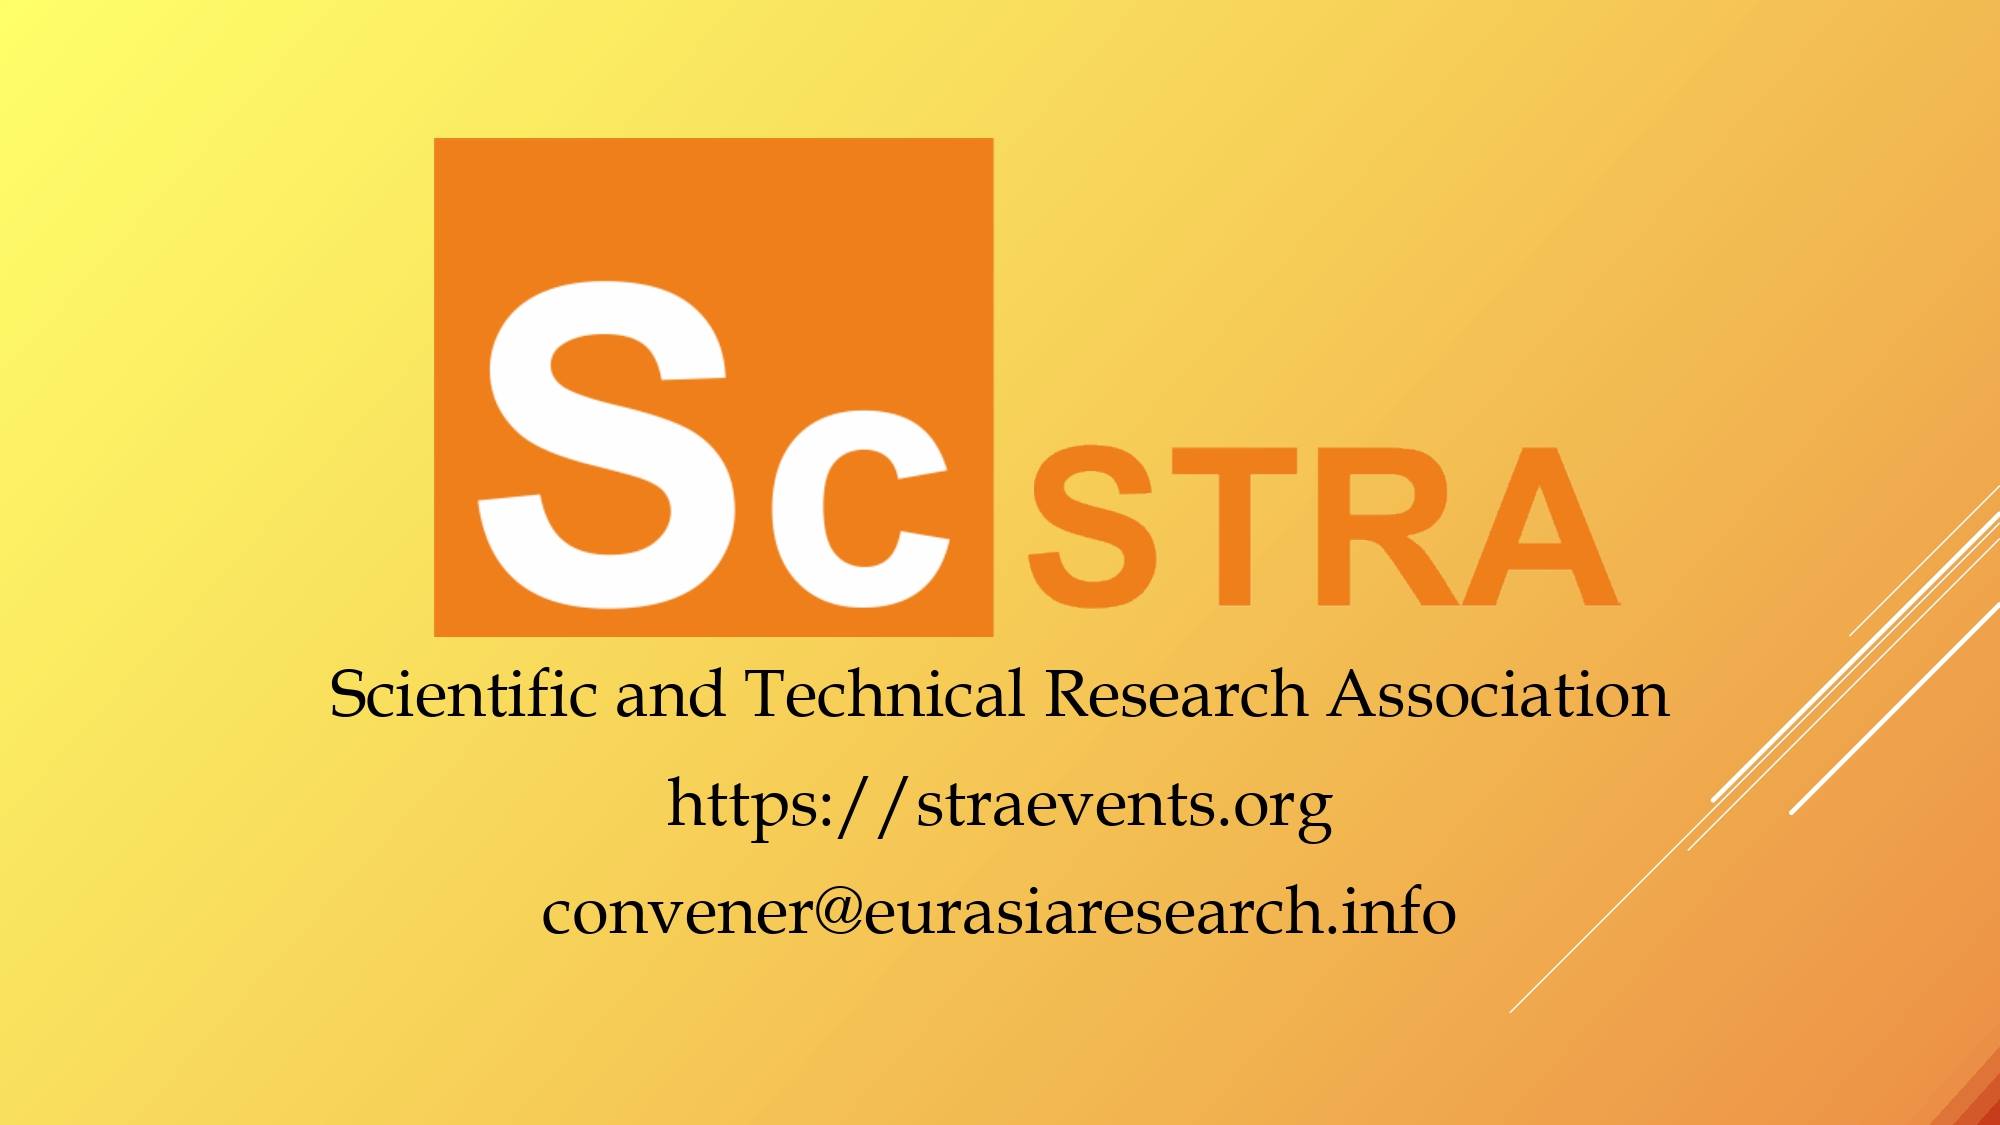 8th ICSTR London – International Conference on Science & Technology Research, 28-29 April 2022, London, United Kingdom